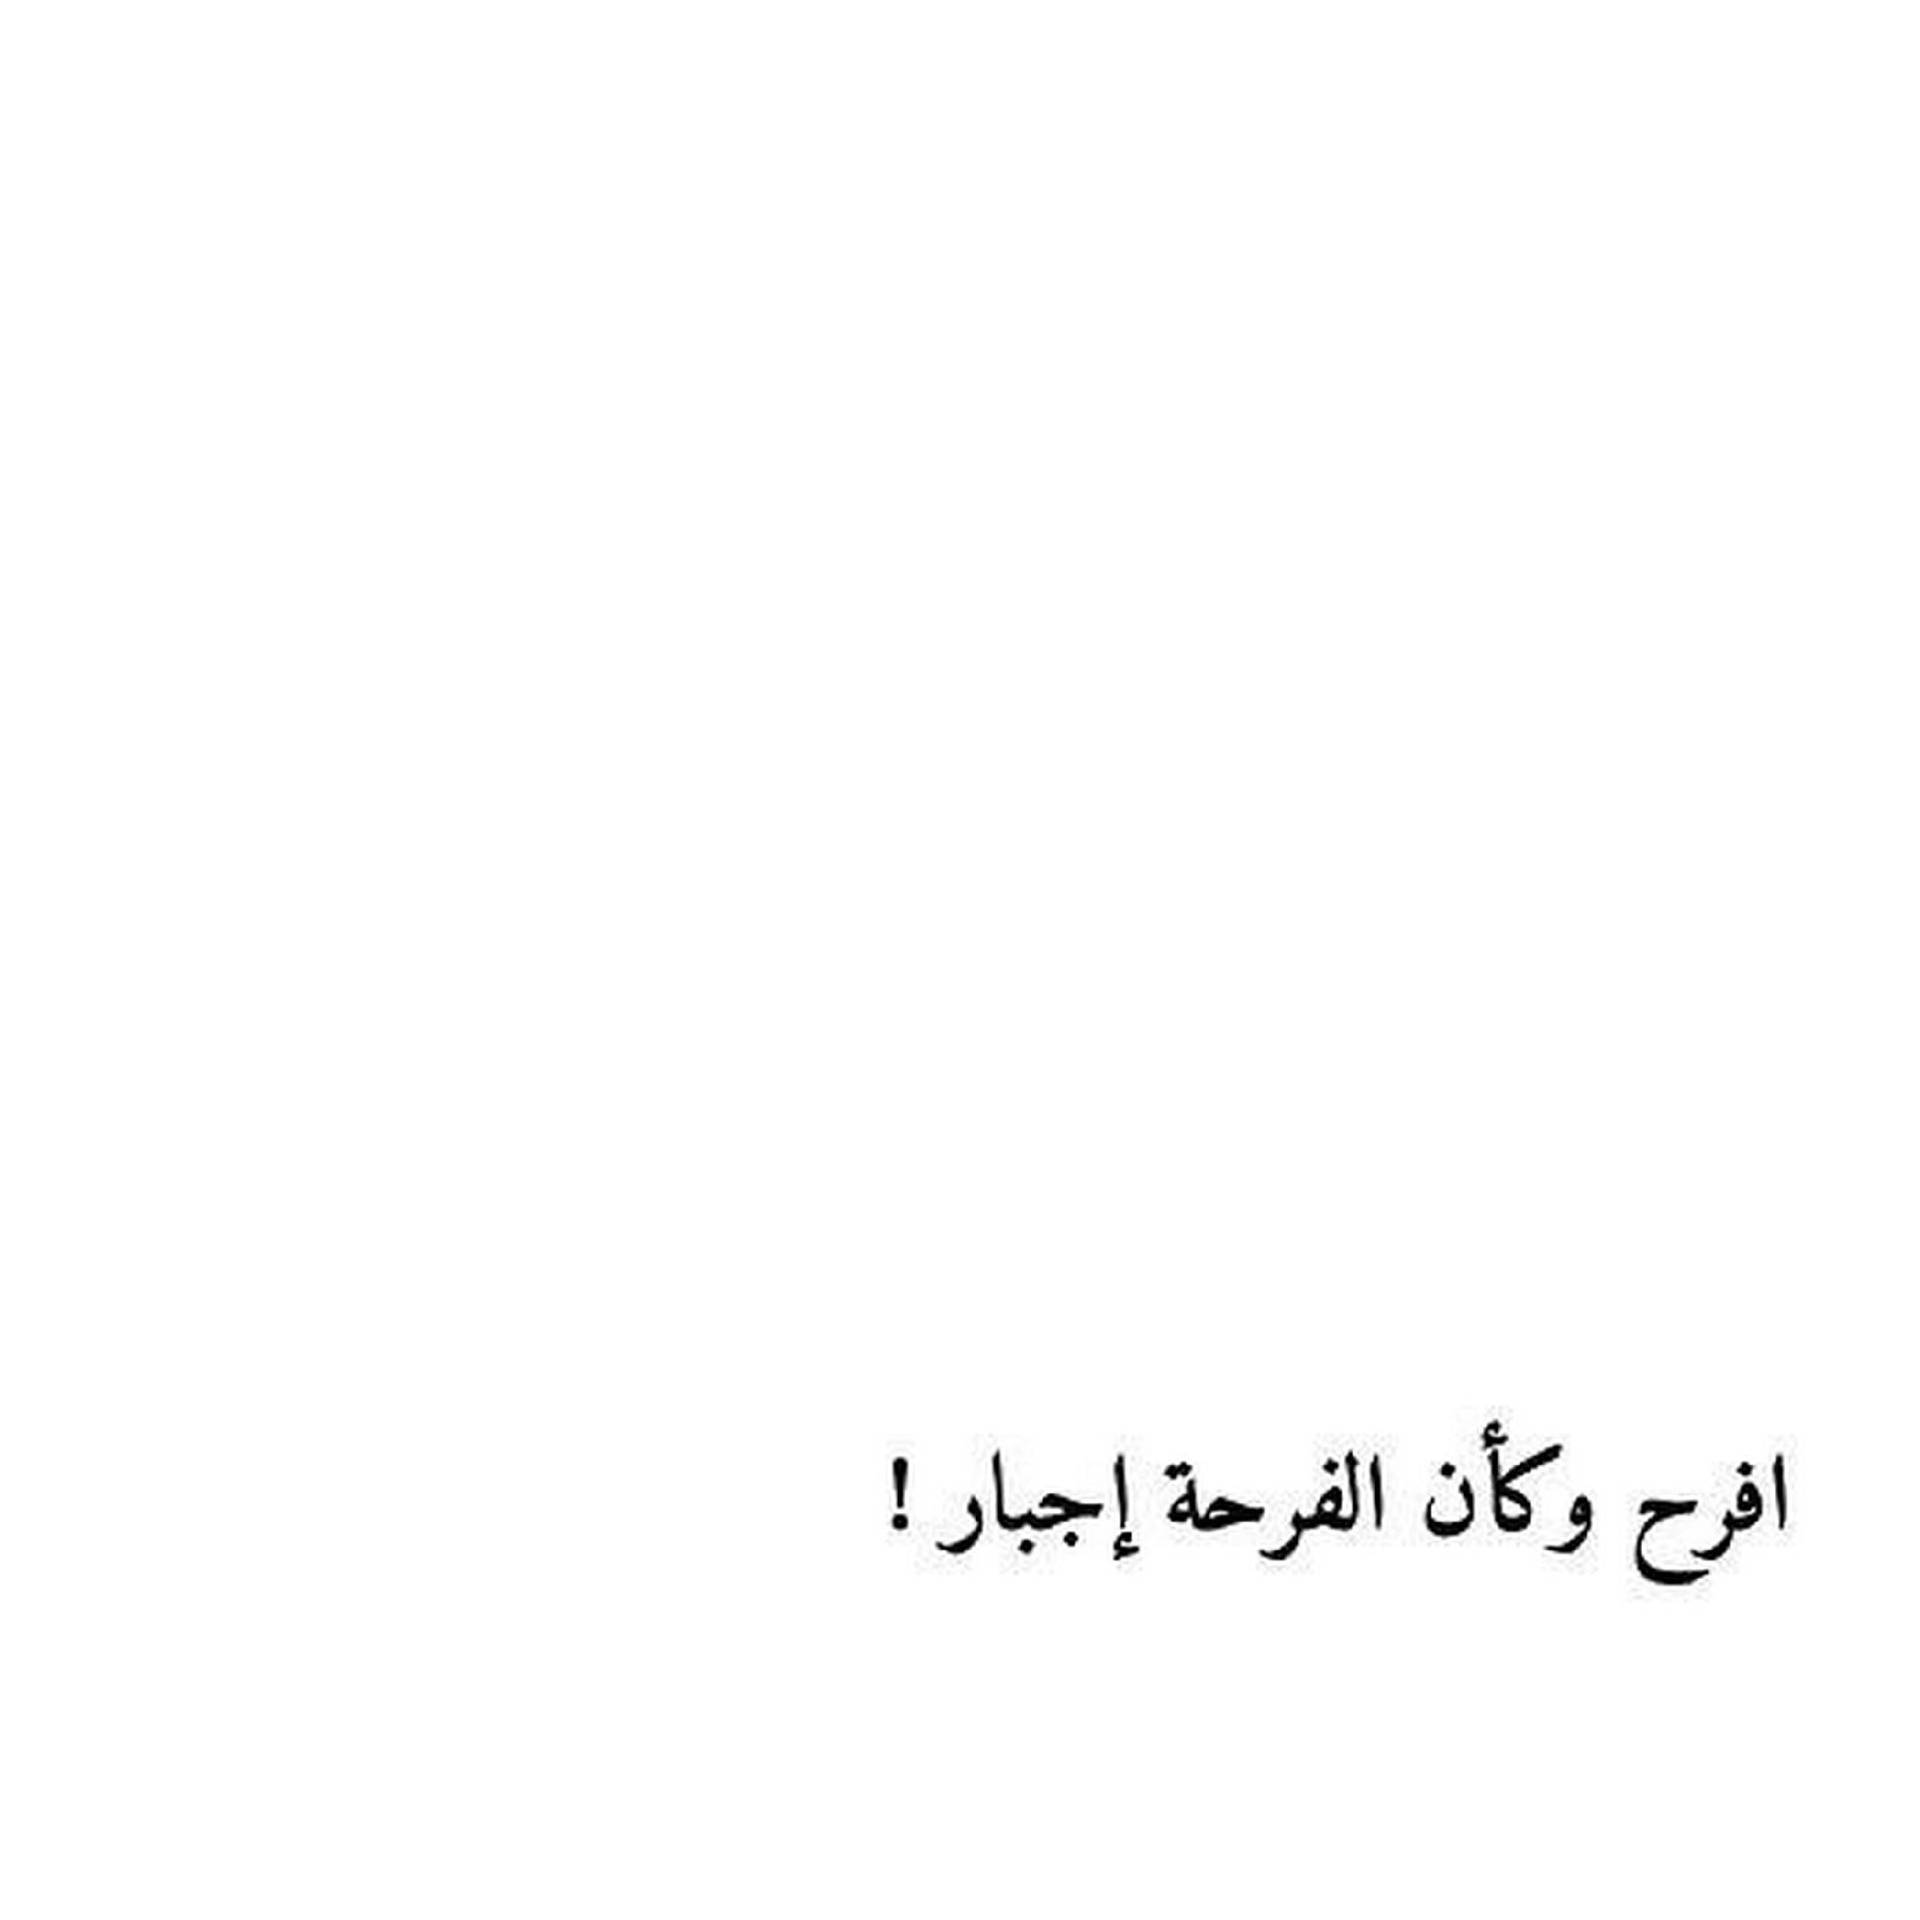 Blank White Arabic Text Picture